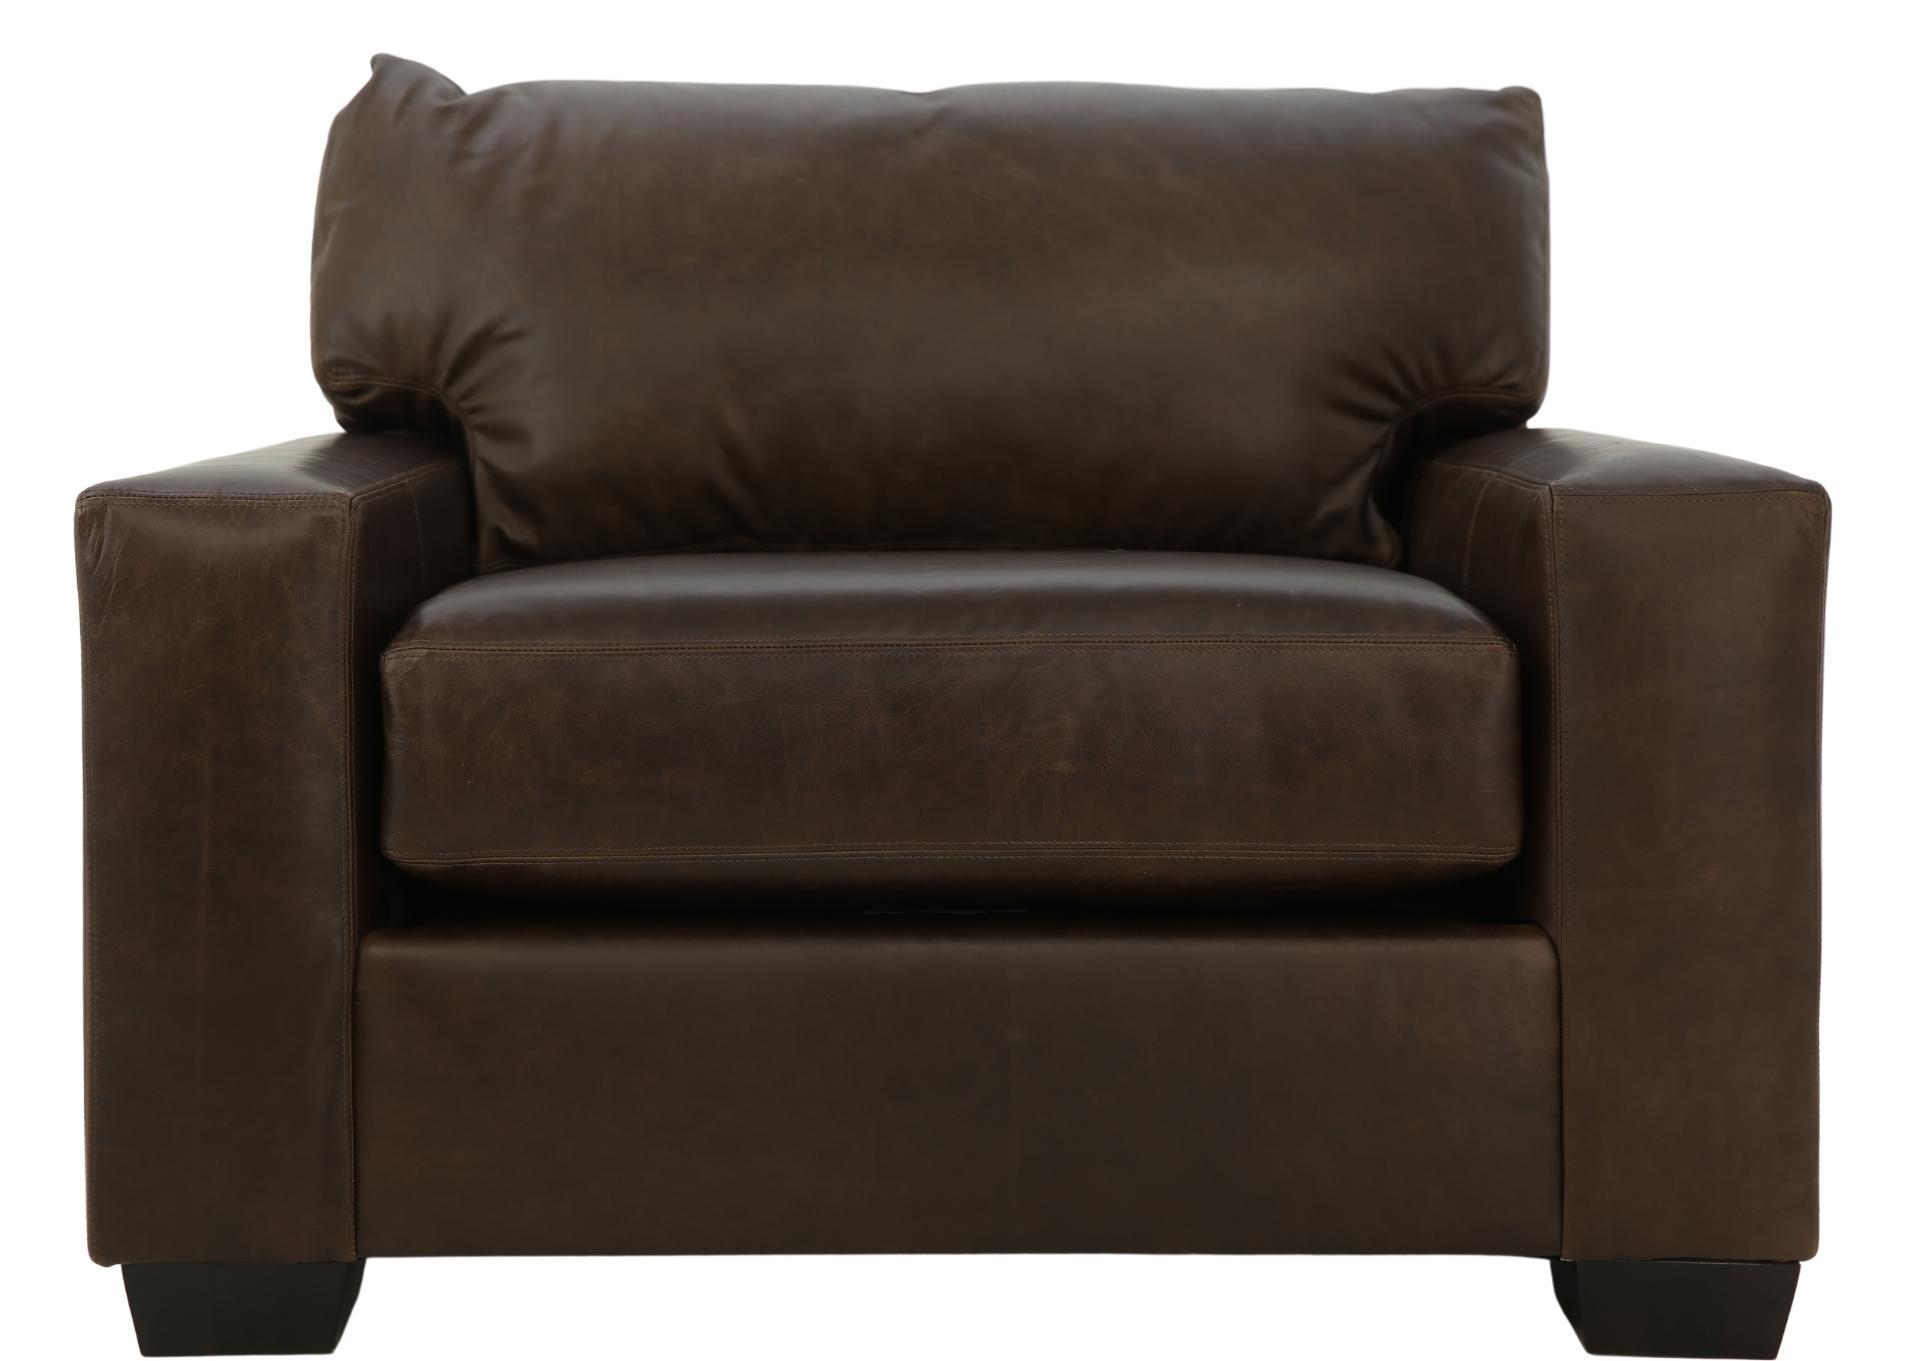 CLARK LEATHER CHAIR,STONE & LEIGH FURNITURE